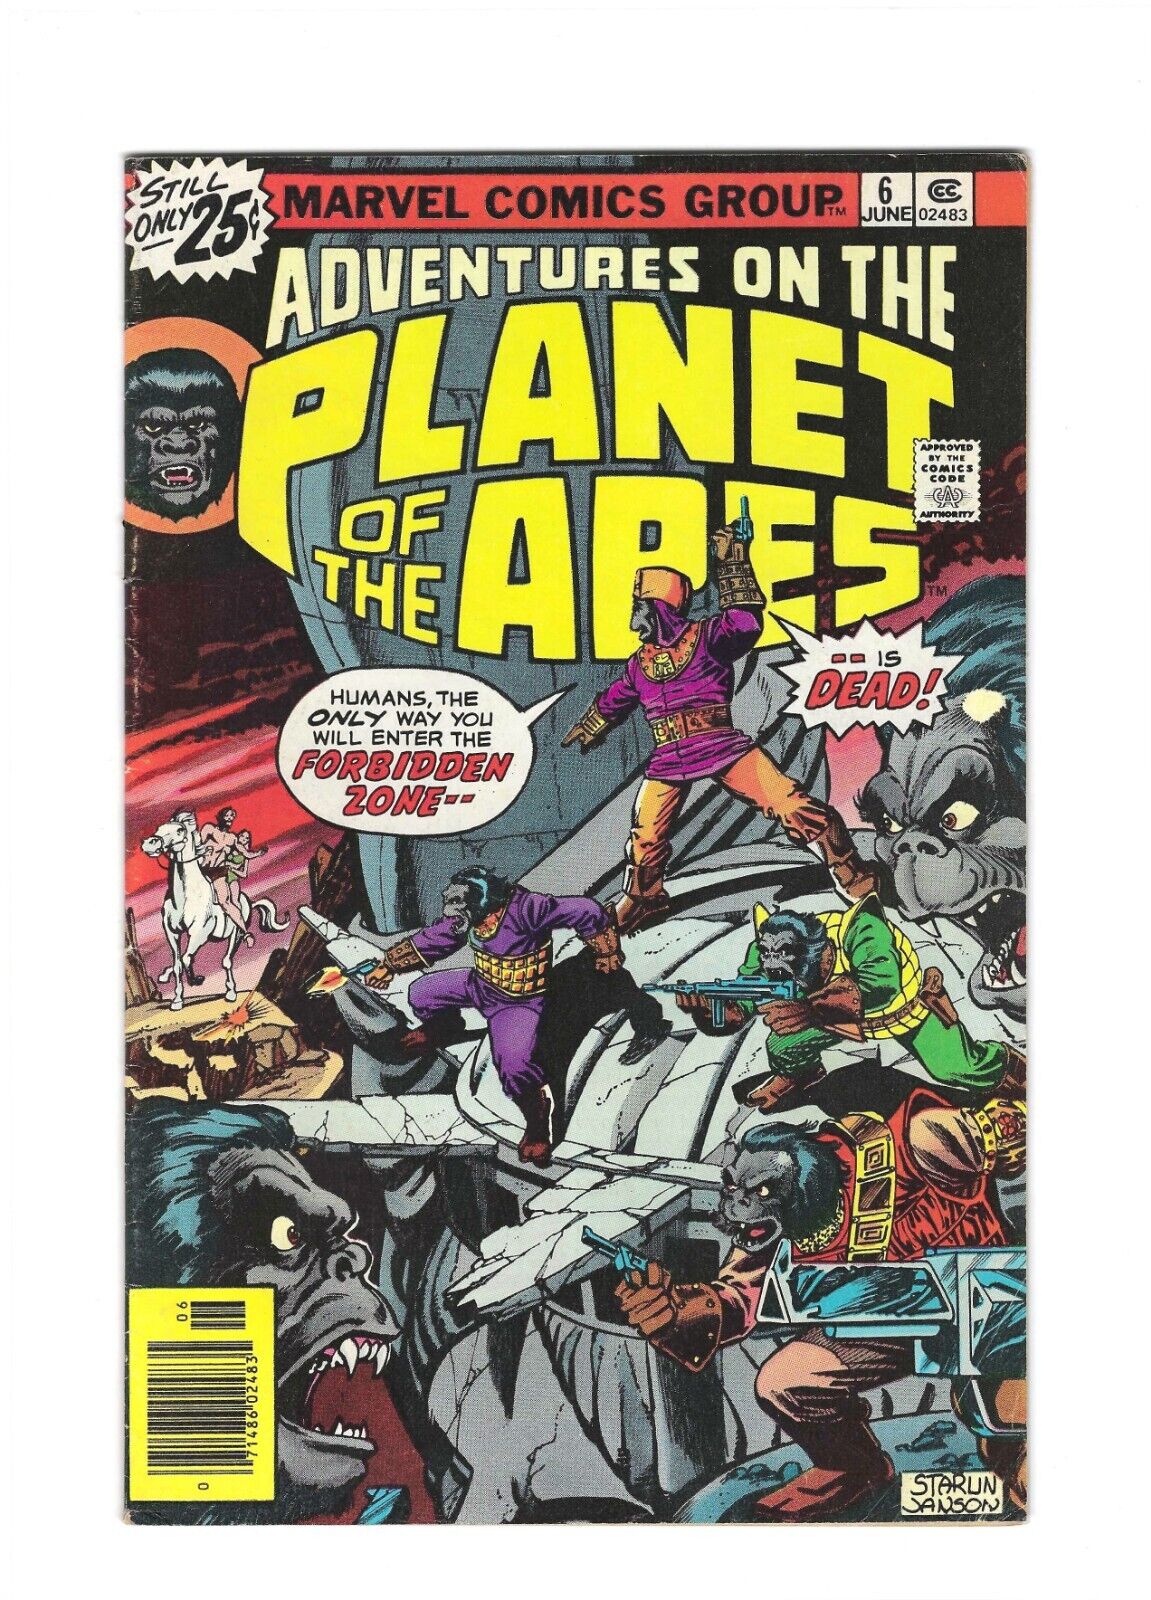 Adventures on the Planet of the Apes #6:Cleaned:Pressed:Bagged:Boarded! FN-VF 7